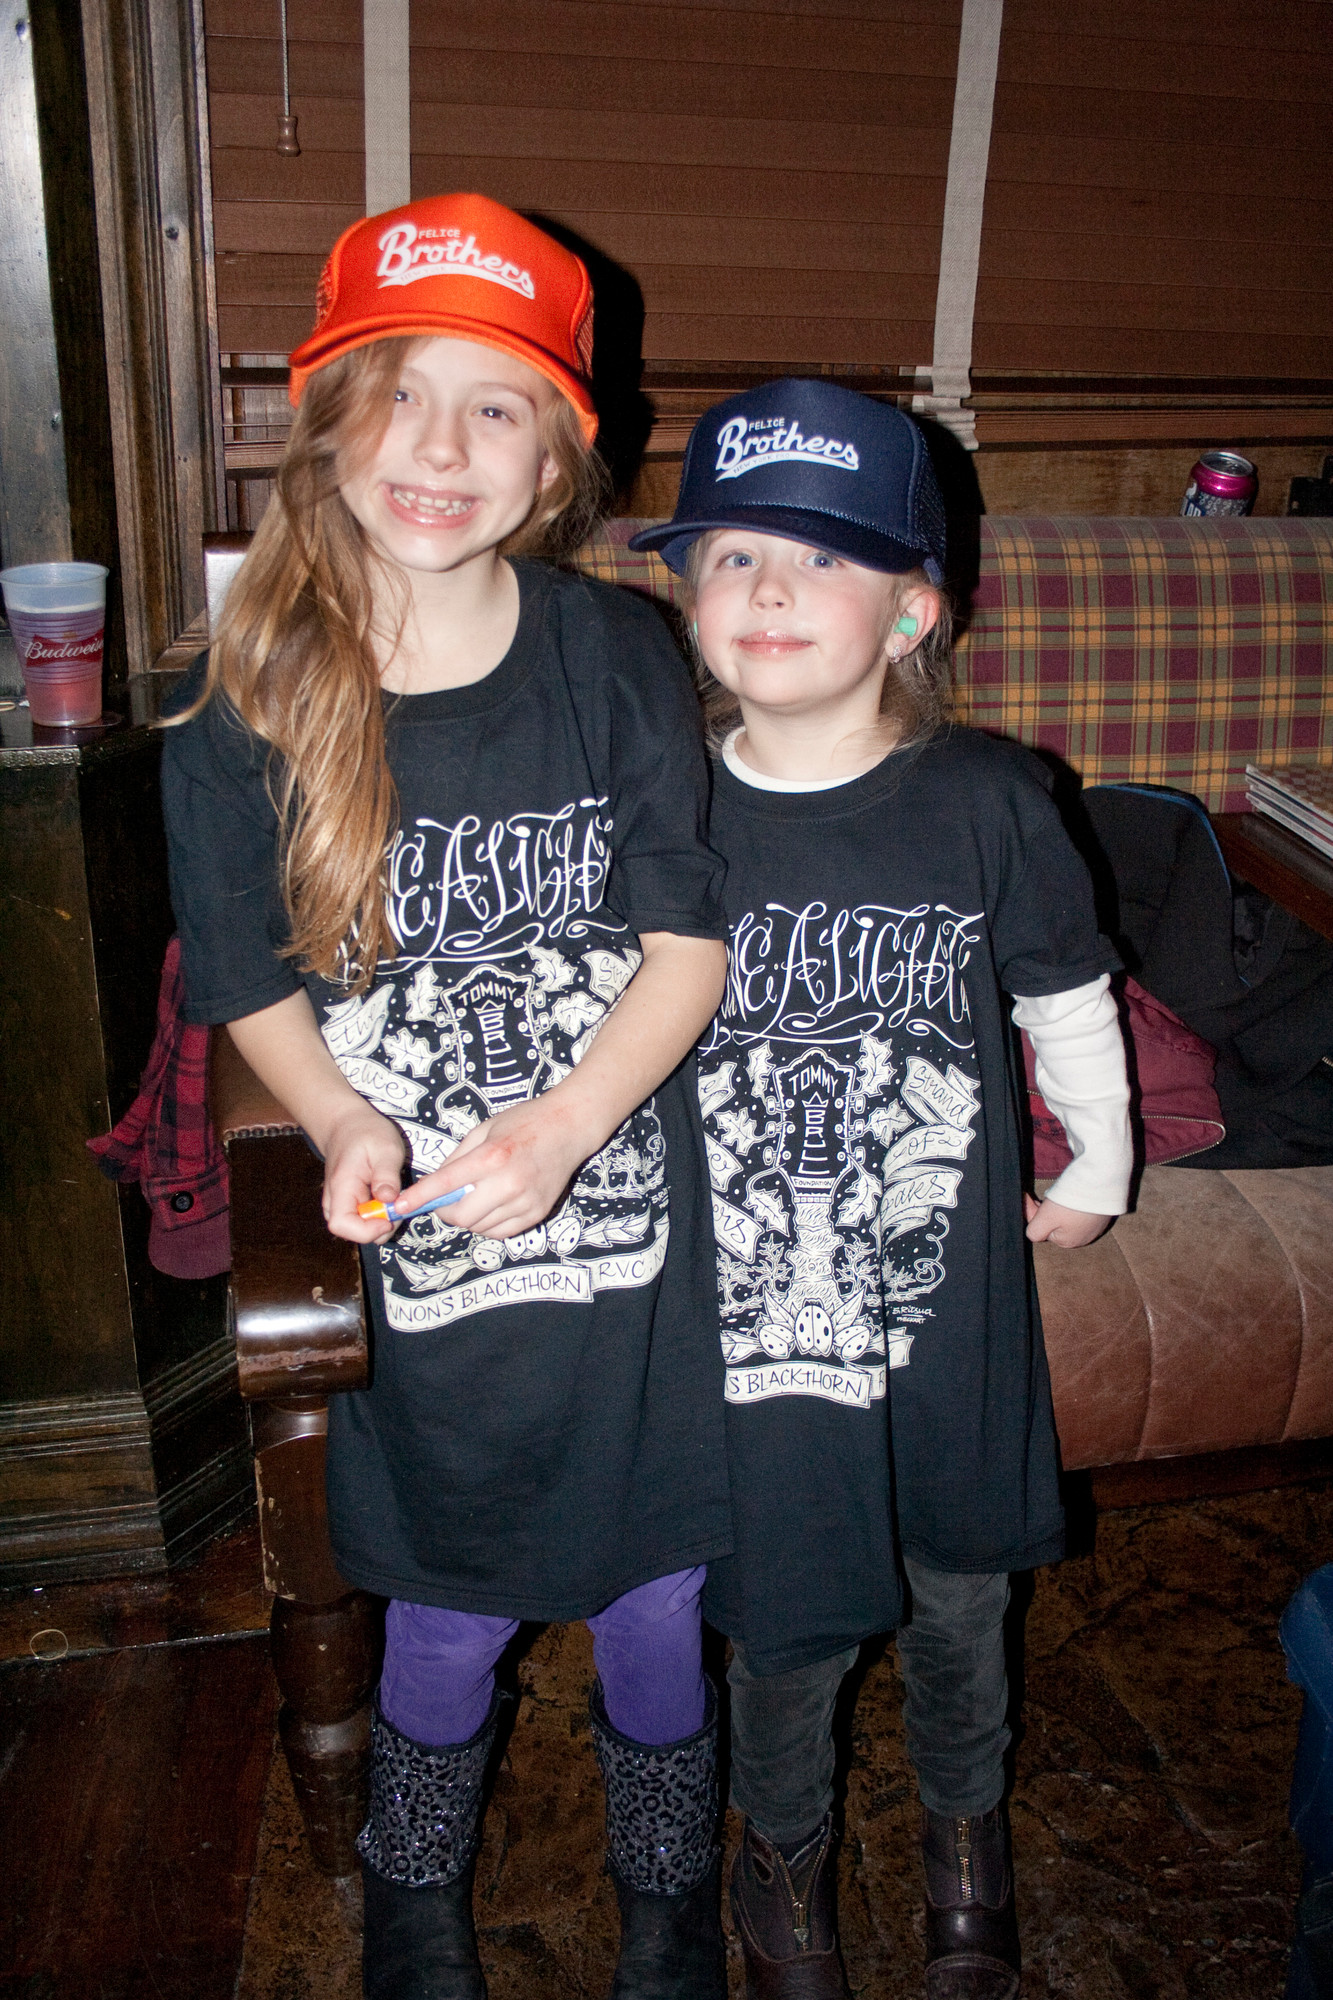 Grace and Emily Chagnon, Tommy Brull’s cousins, sported Shine-a-Light merchandise at the show.